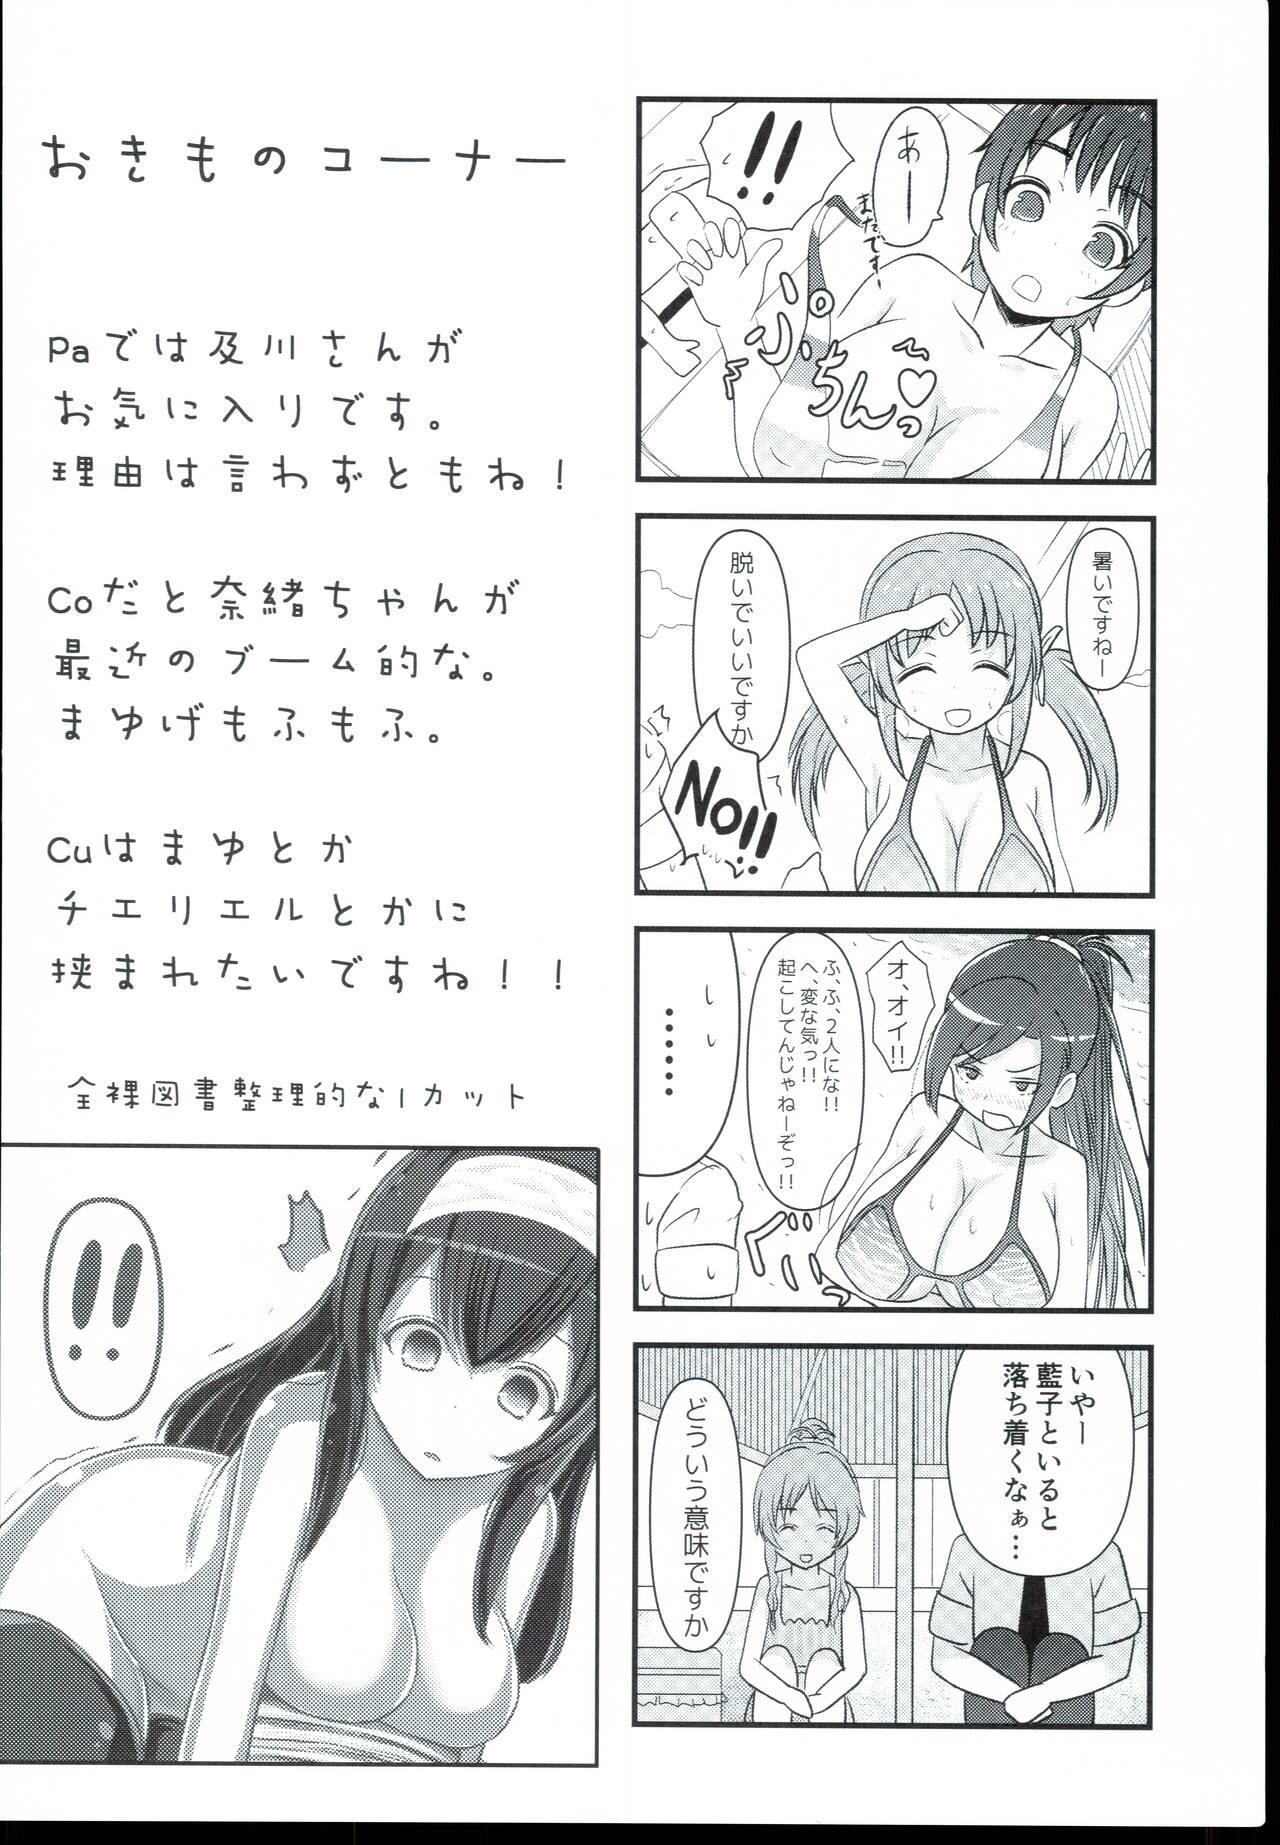 Femdom Clips Fumifumi? Fumifumi. Fumifumi... Fumifumi!! - The idolmaster Shemale - Page 6